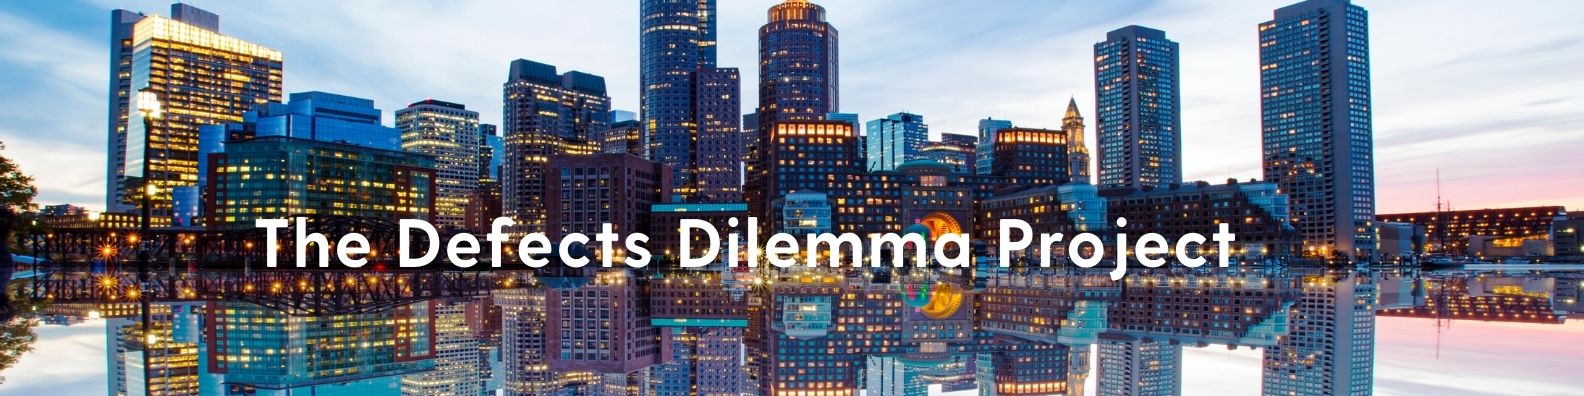 Defects dilemma project, solving dangerous defects in apartment towers. Dr Jon Drane